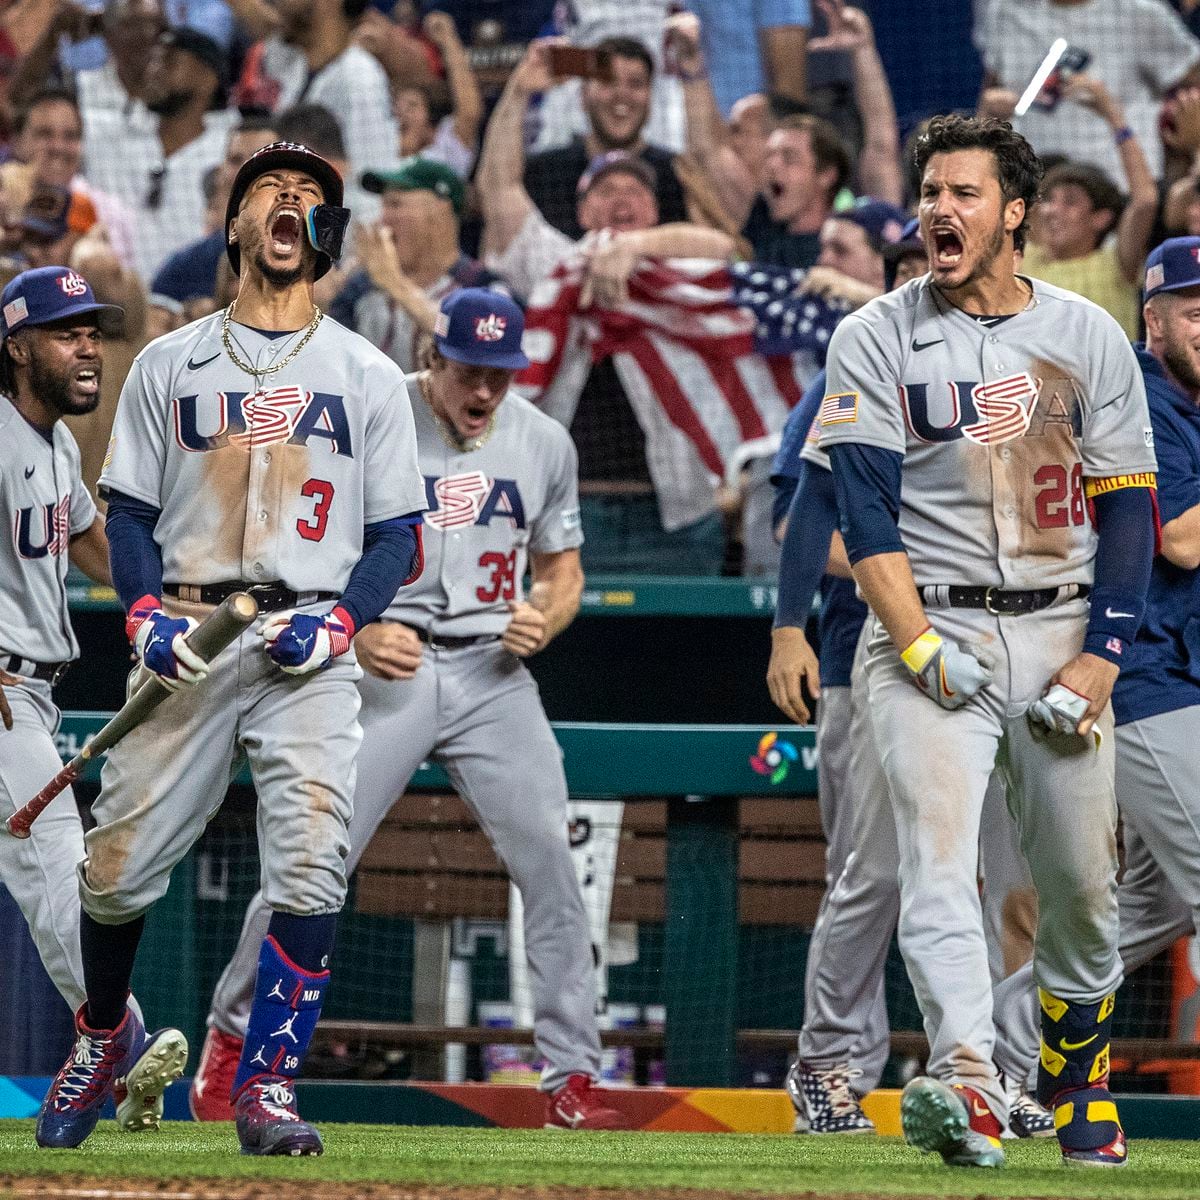 Mike Trout drives in all 3 runs as Team USA advances - Stream the